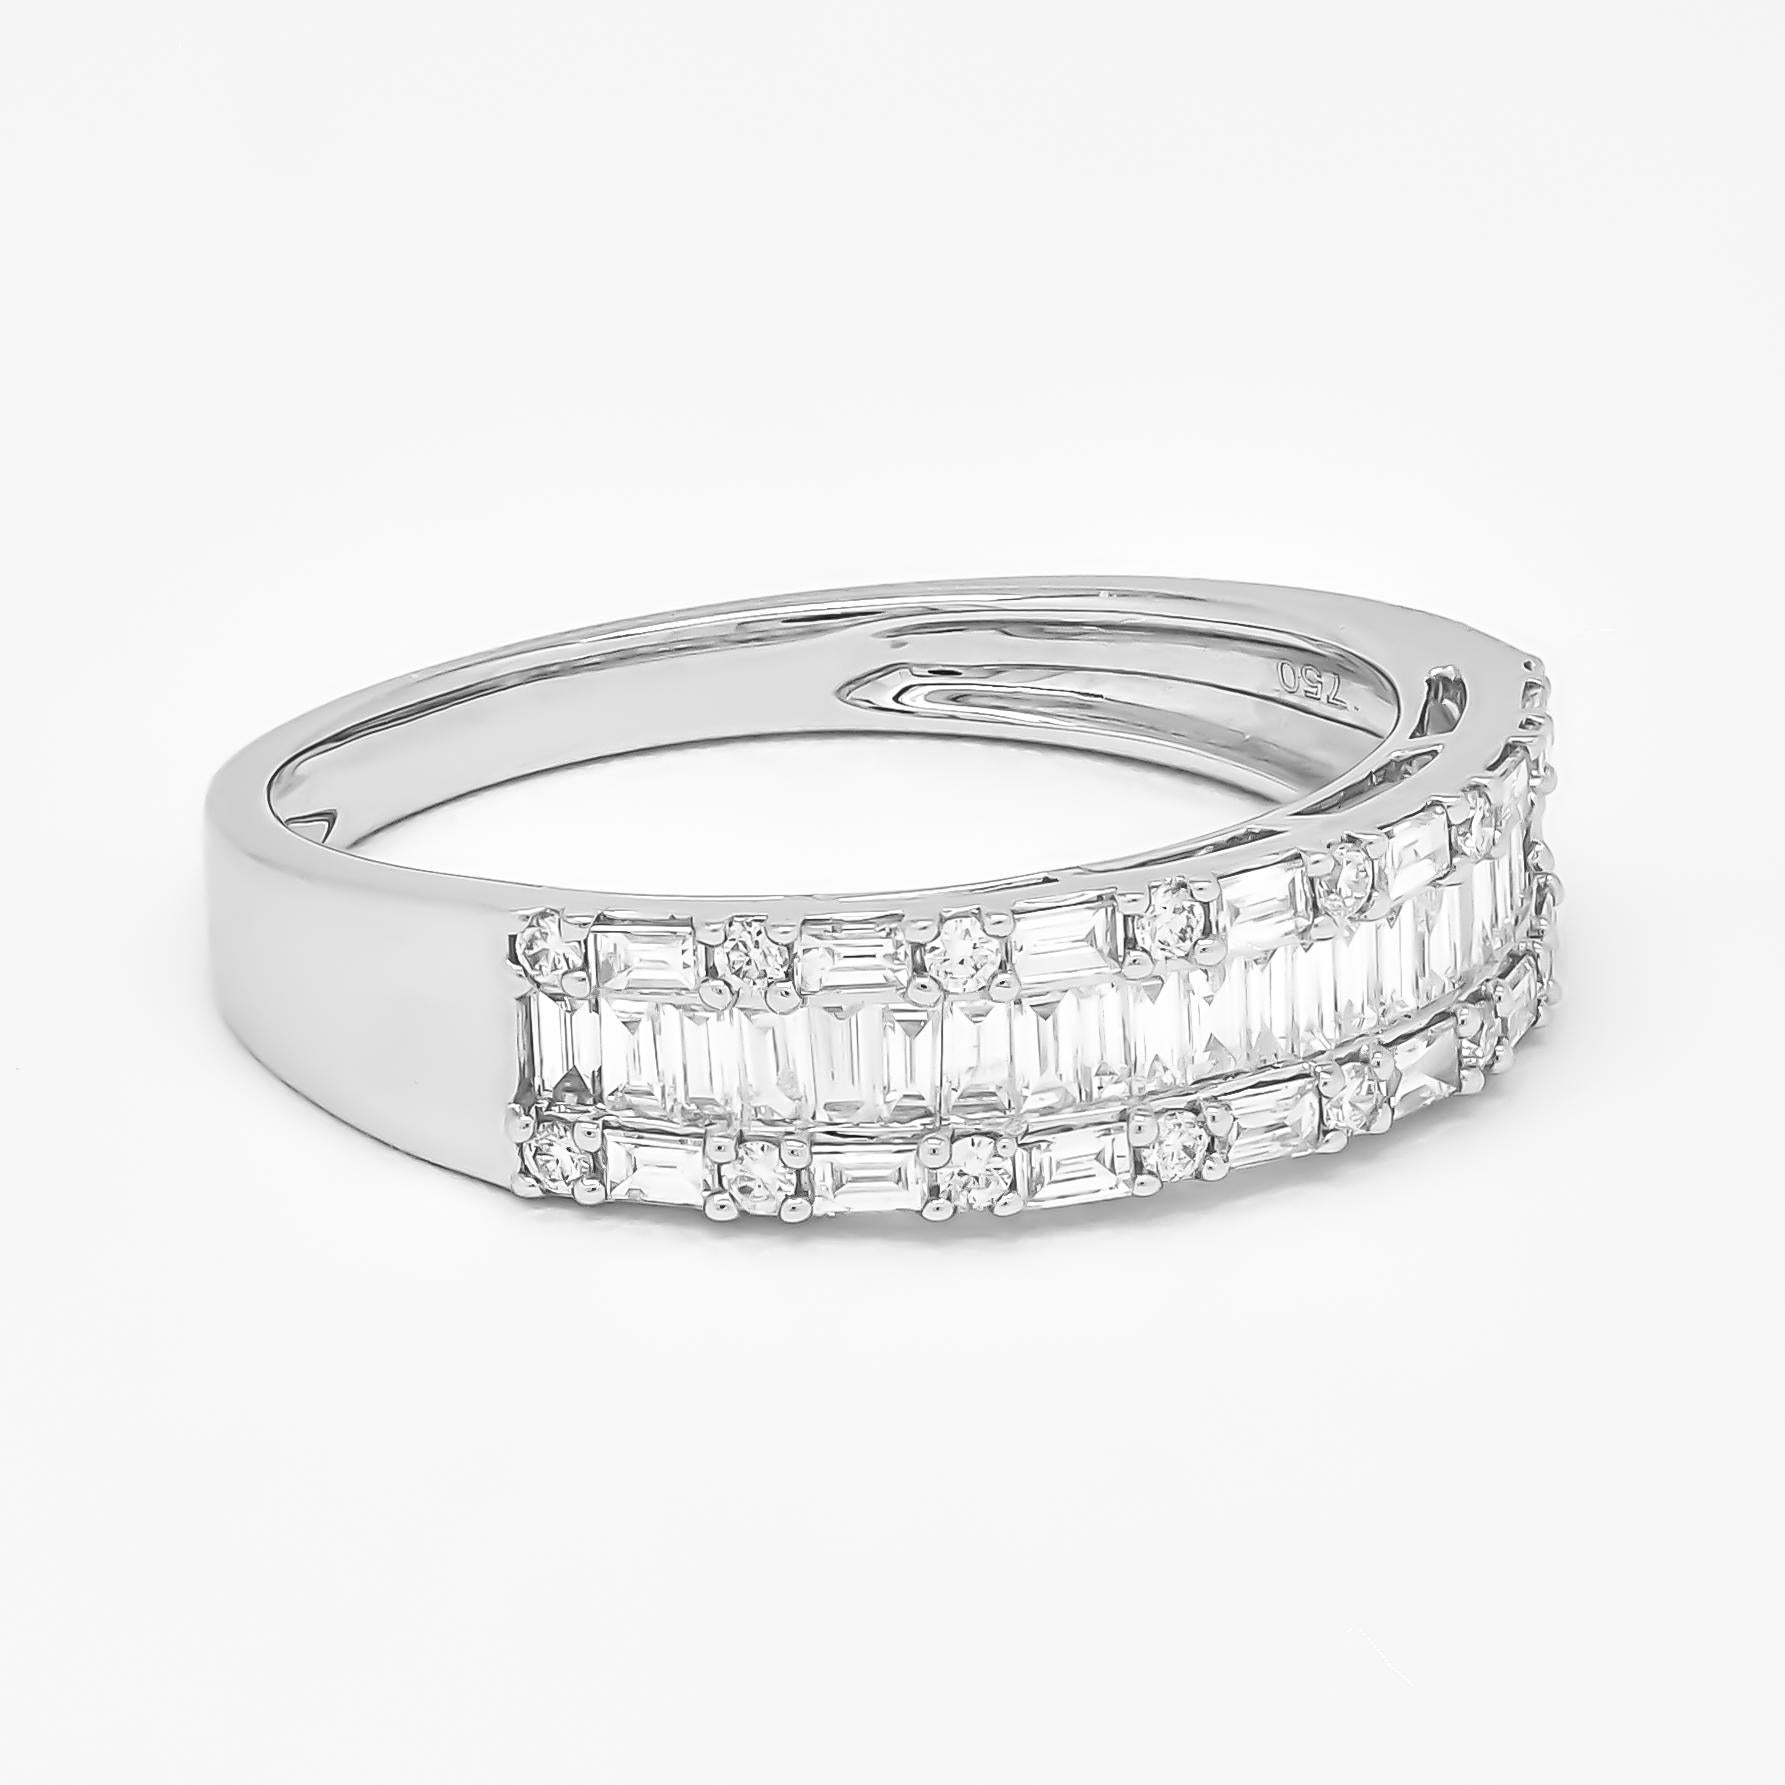 For Sale:  Exclusive Design 0.70 Carat Baguette Diamond Wedding Ring in White Gold 3